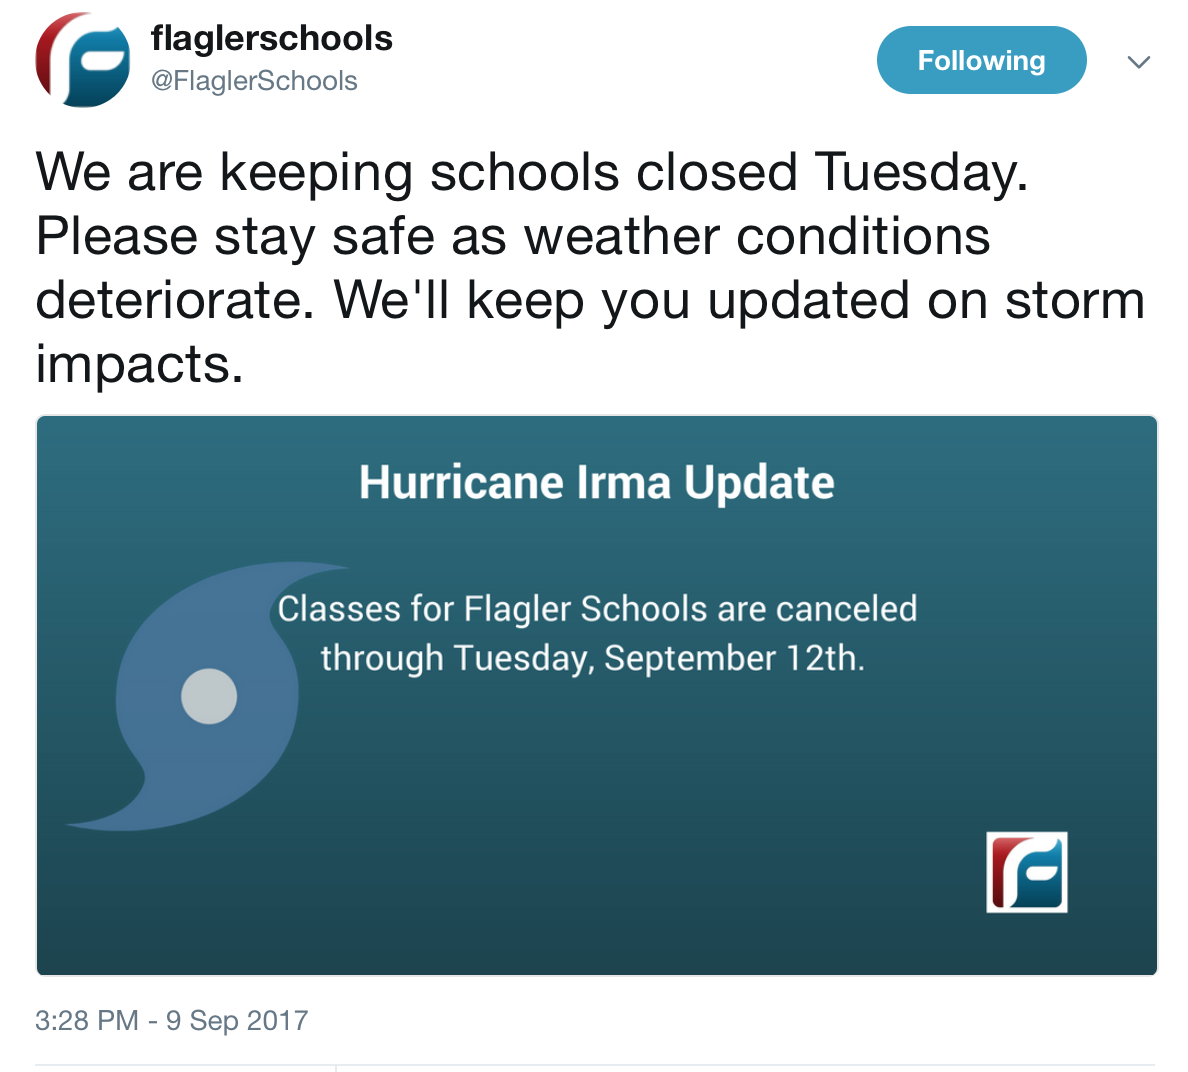 Flagler Schools tweeted this notice out at 3:28 p.m. Saturday, Sept. 9.